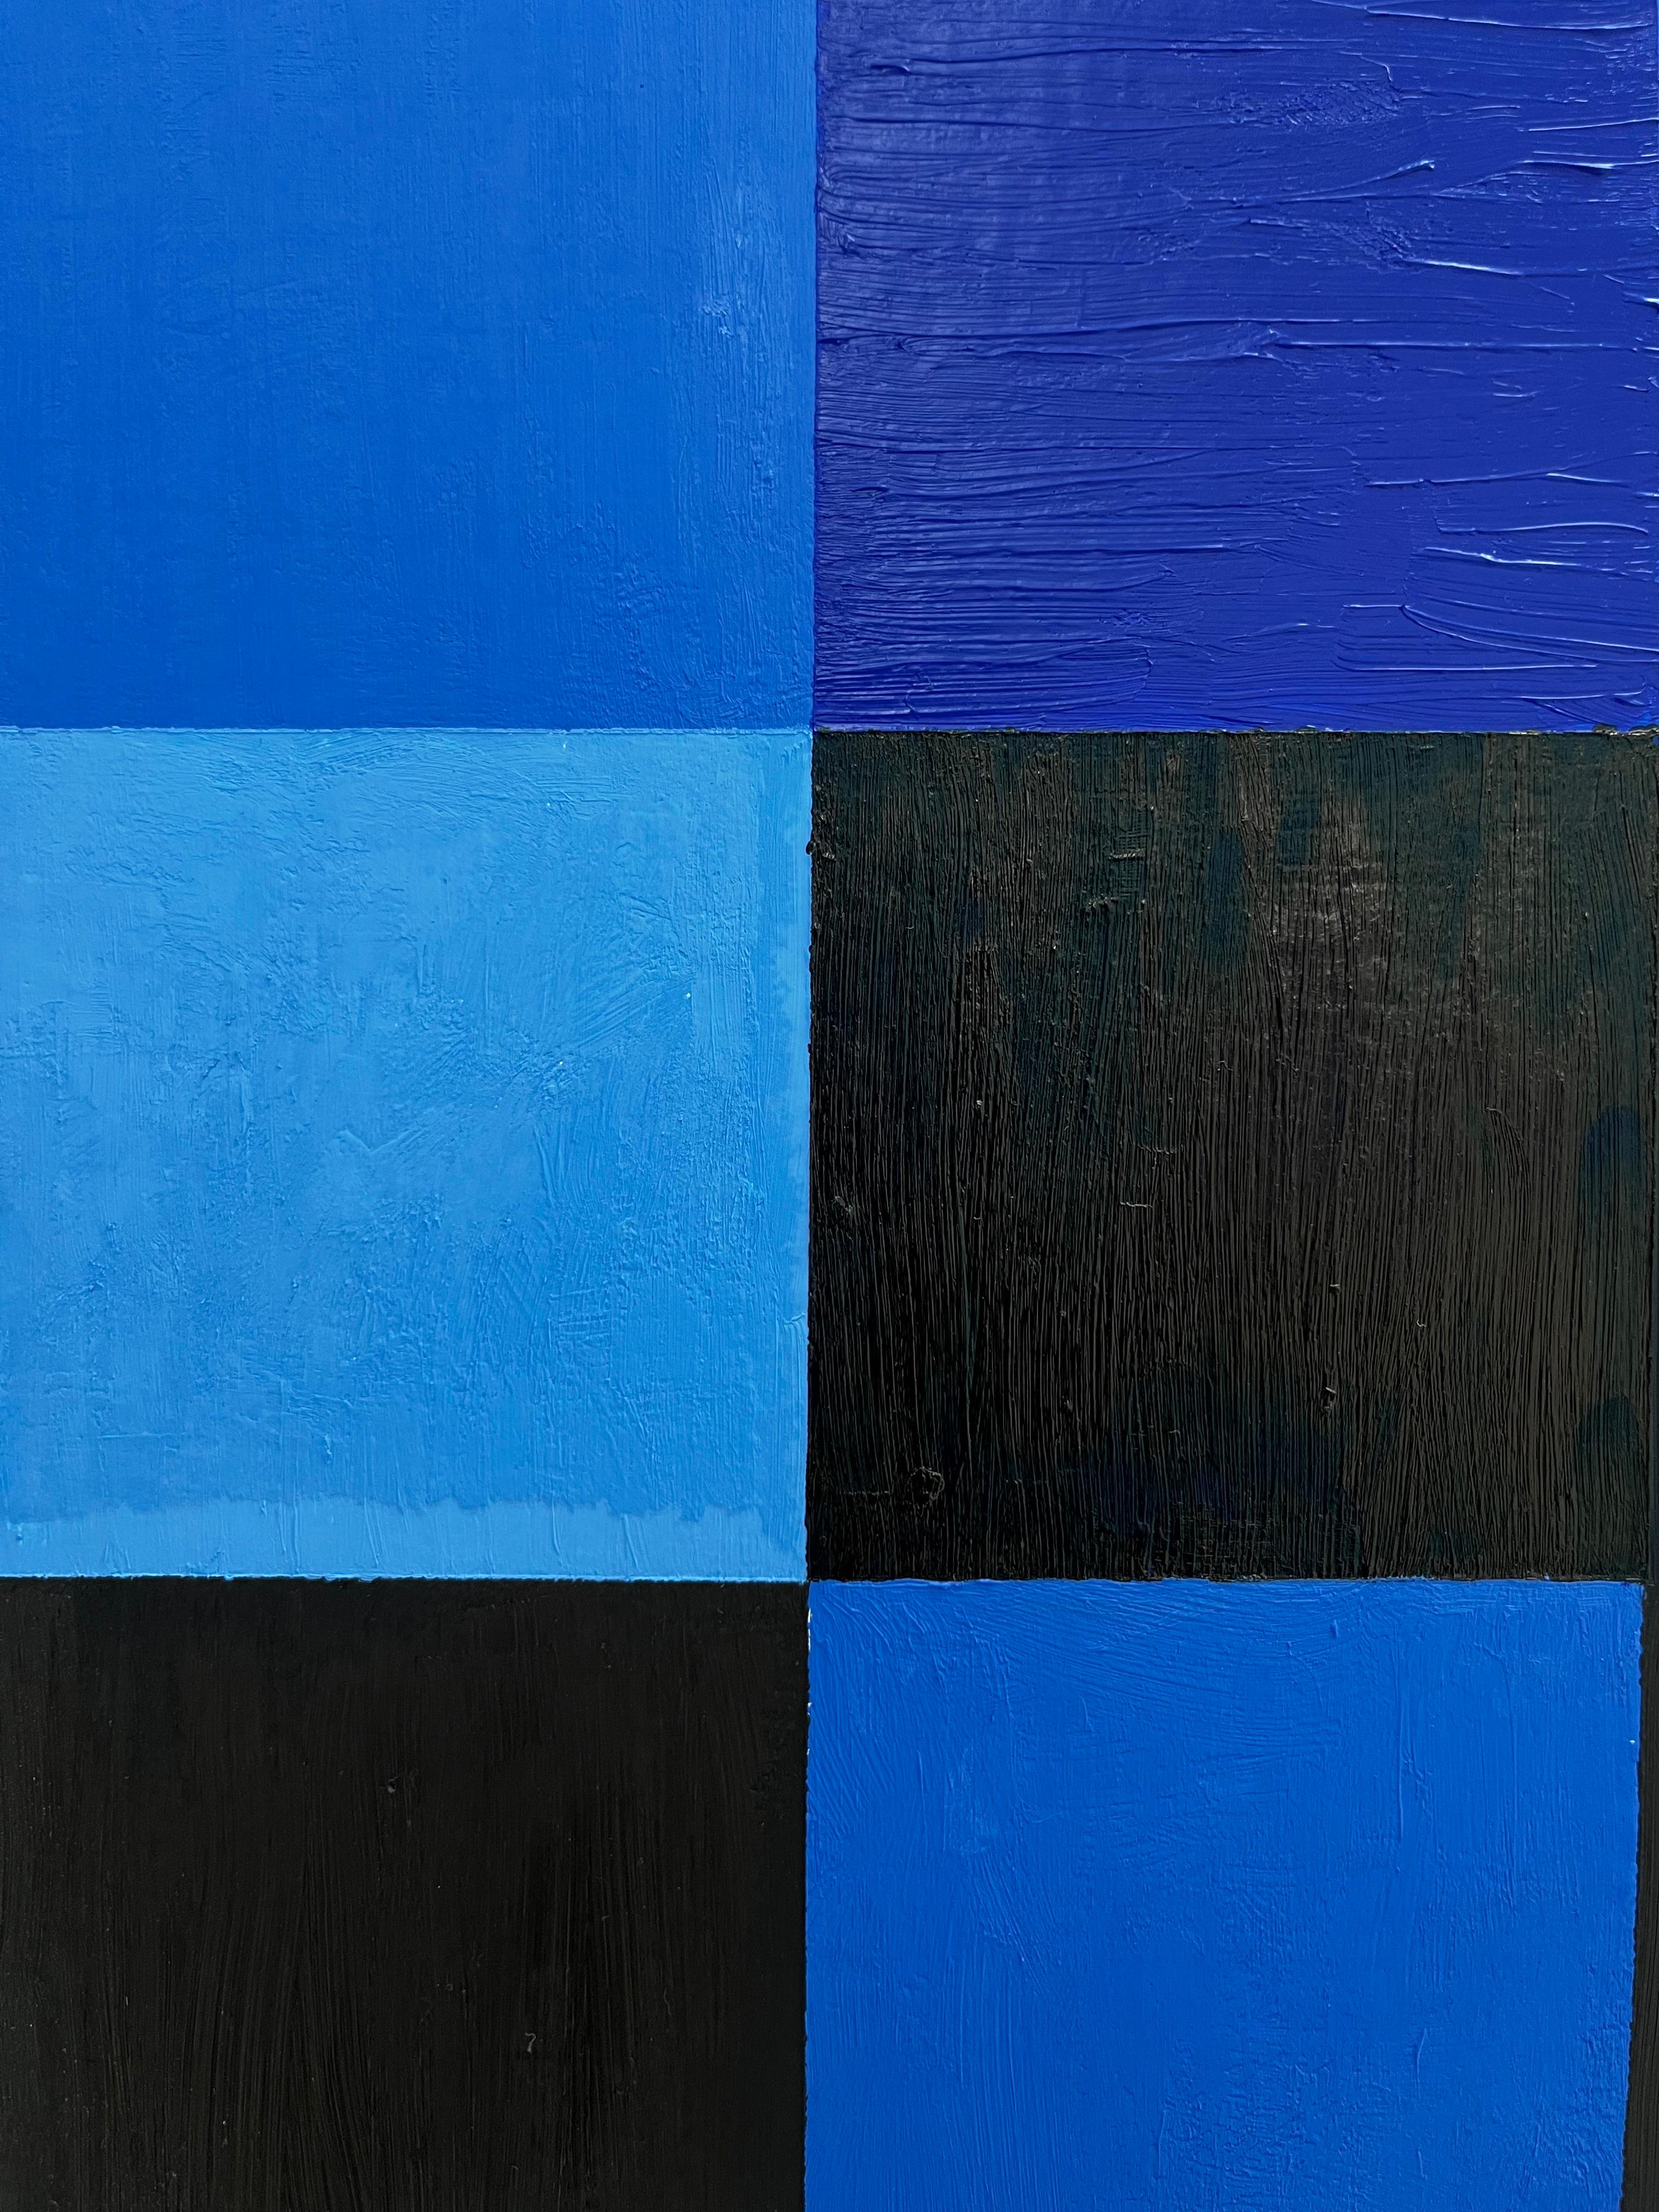 Untitled - abstract oil painting, squares, blue & black - Painting by Nicolás Guzmán